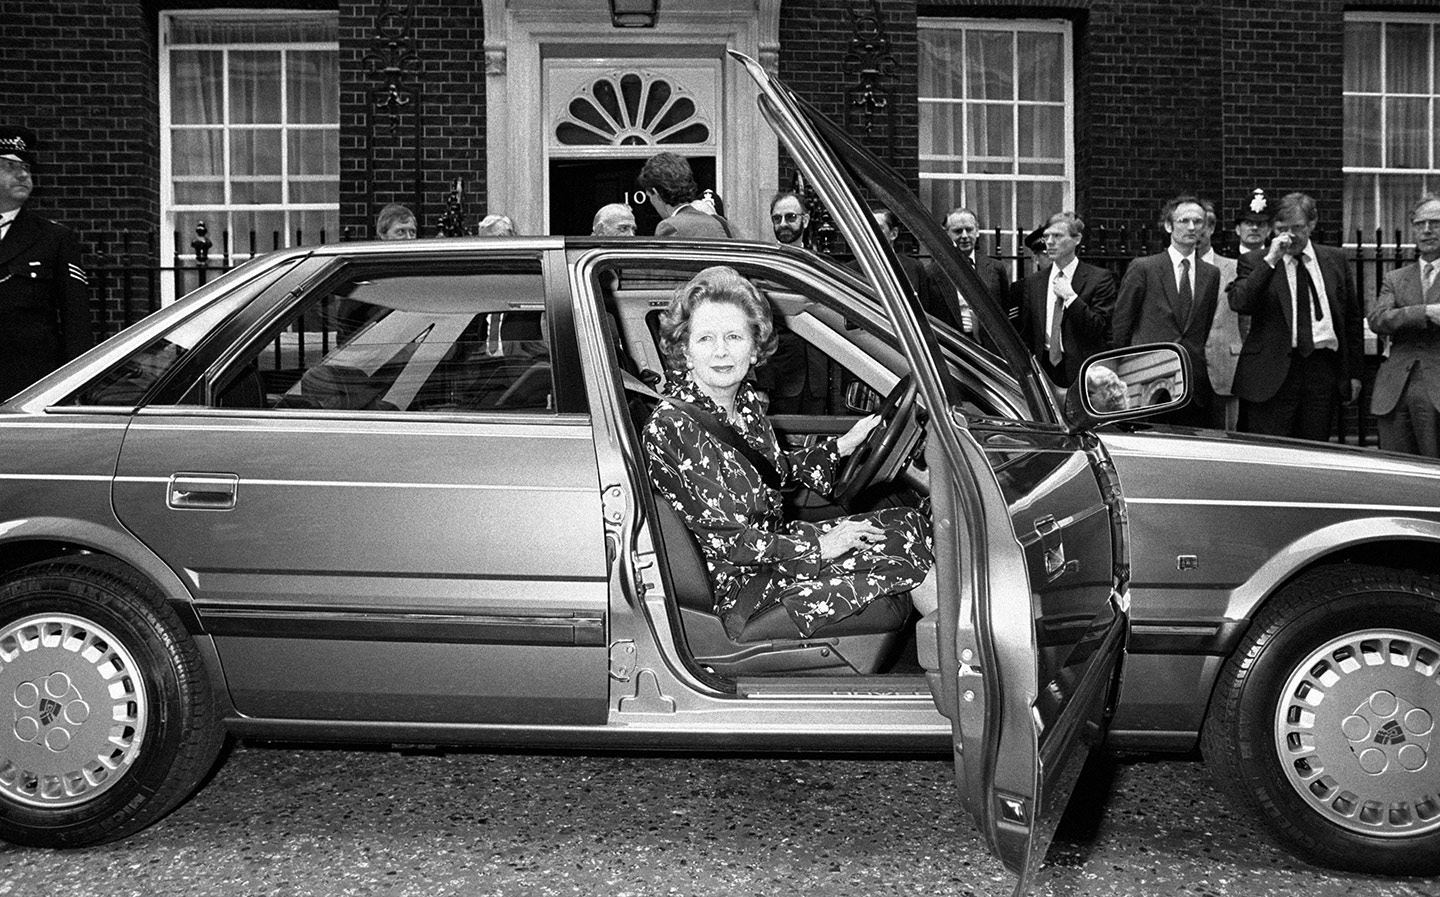 This lady's not for turning: the revealing story behind Margaret Thatcher's Rover 800 test drive